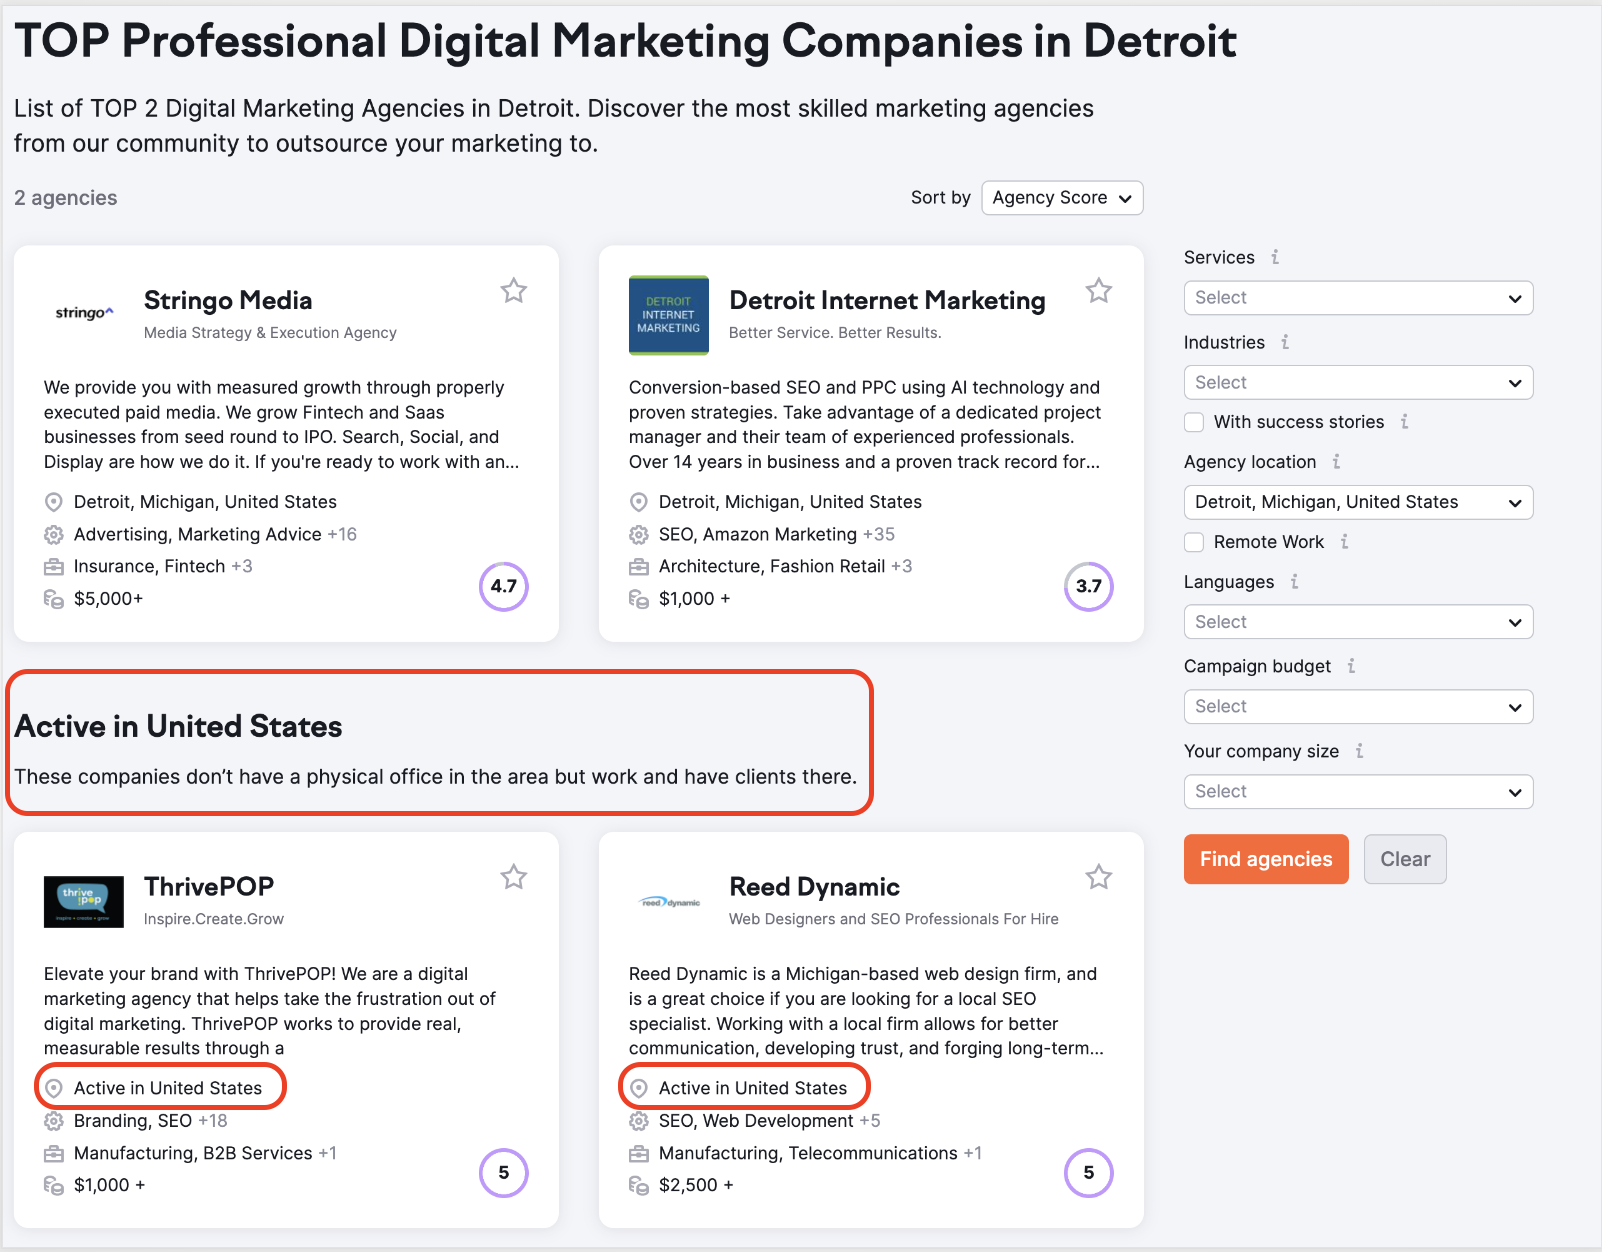 A list of Digital Agencies located in Detroit including those that don't have office but have clients in the United States. They are listed after the 'Active in United States' title (highlighted with a red rectangle).